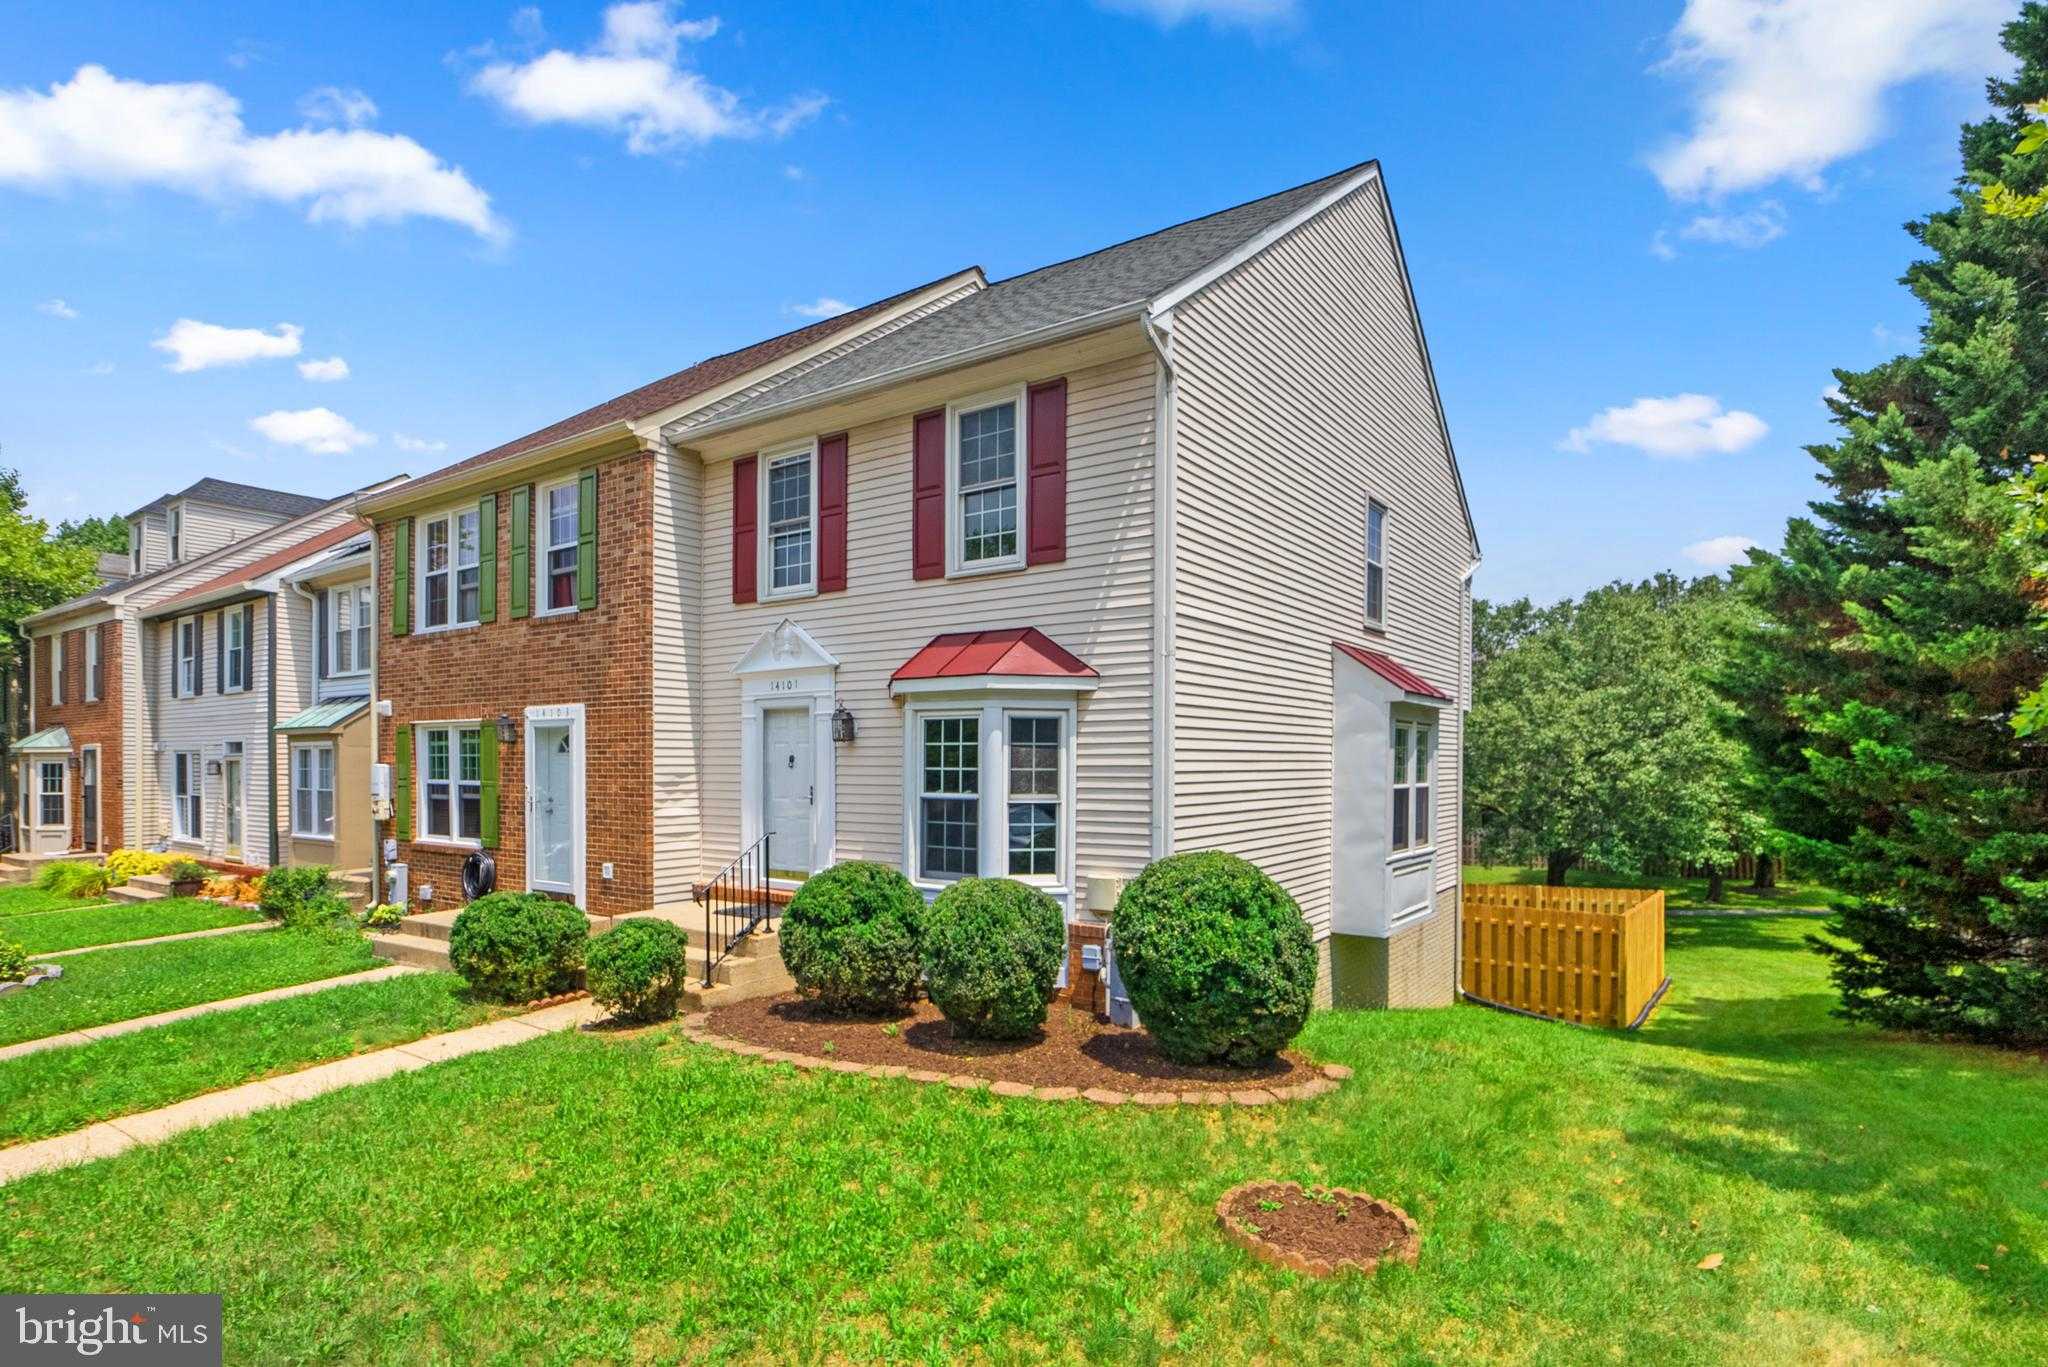 View LAUREL, MD 20707 townhome